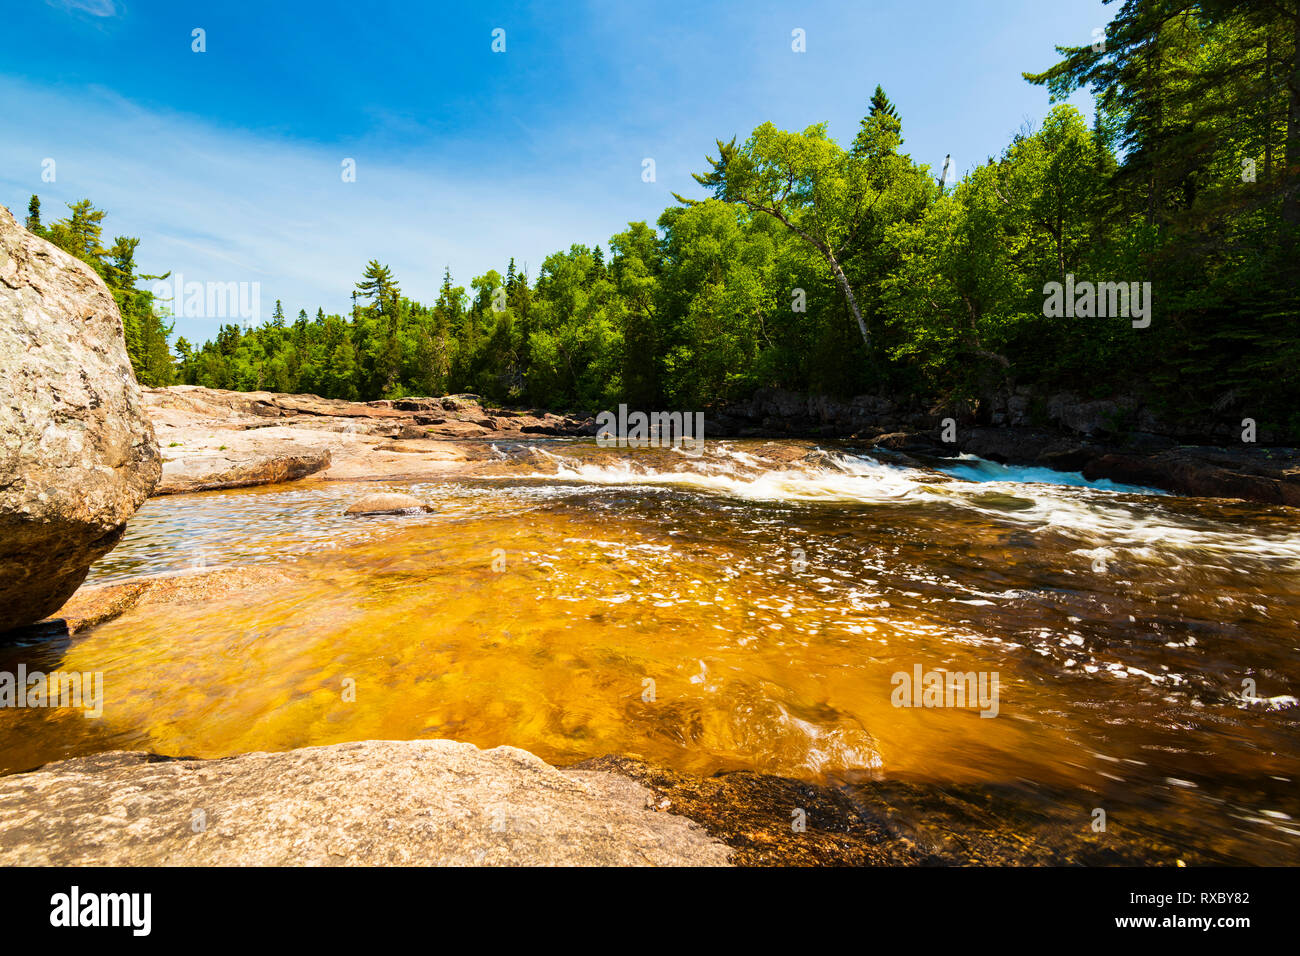 Rapids on the lower Sand River, Lake Superior Provincial Park, Ontario, Canada Stock Photo